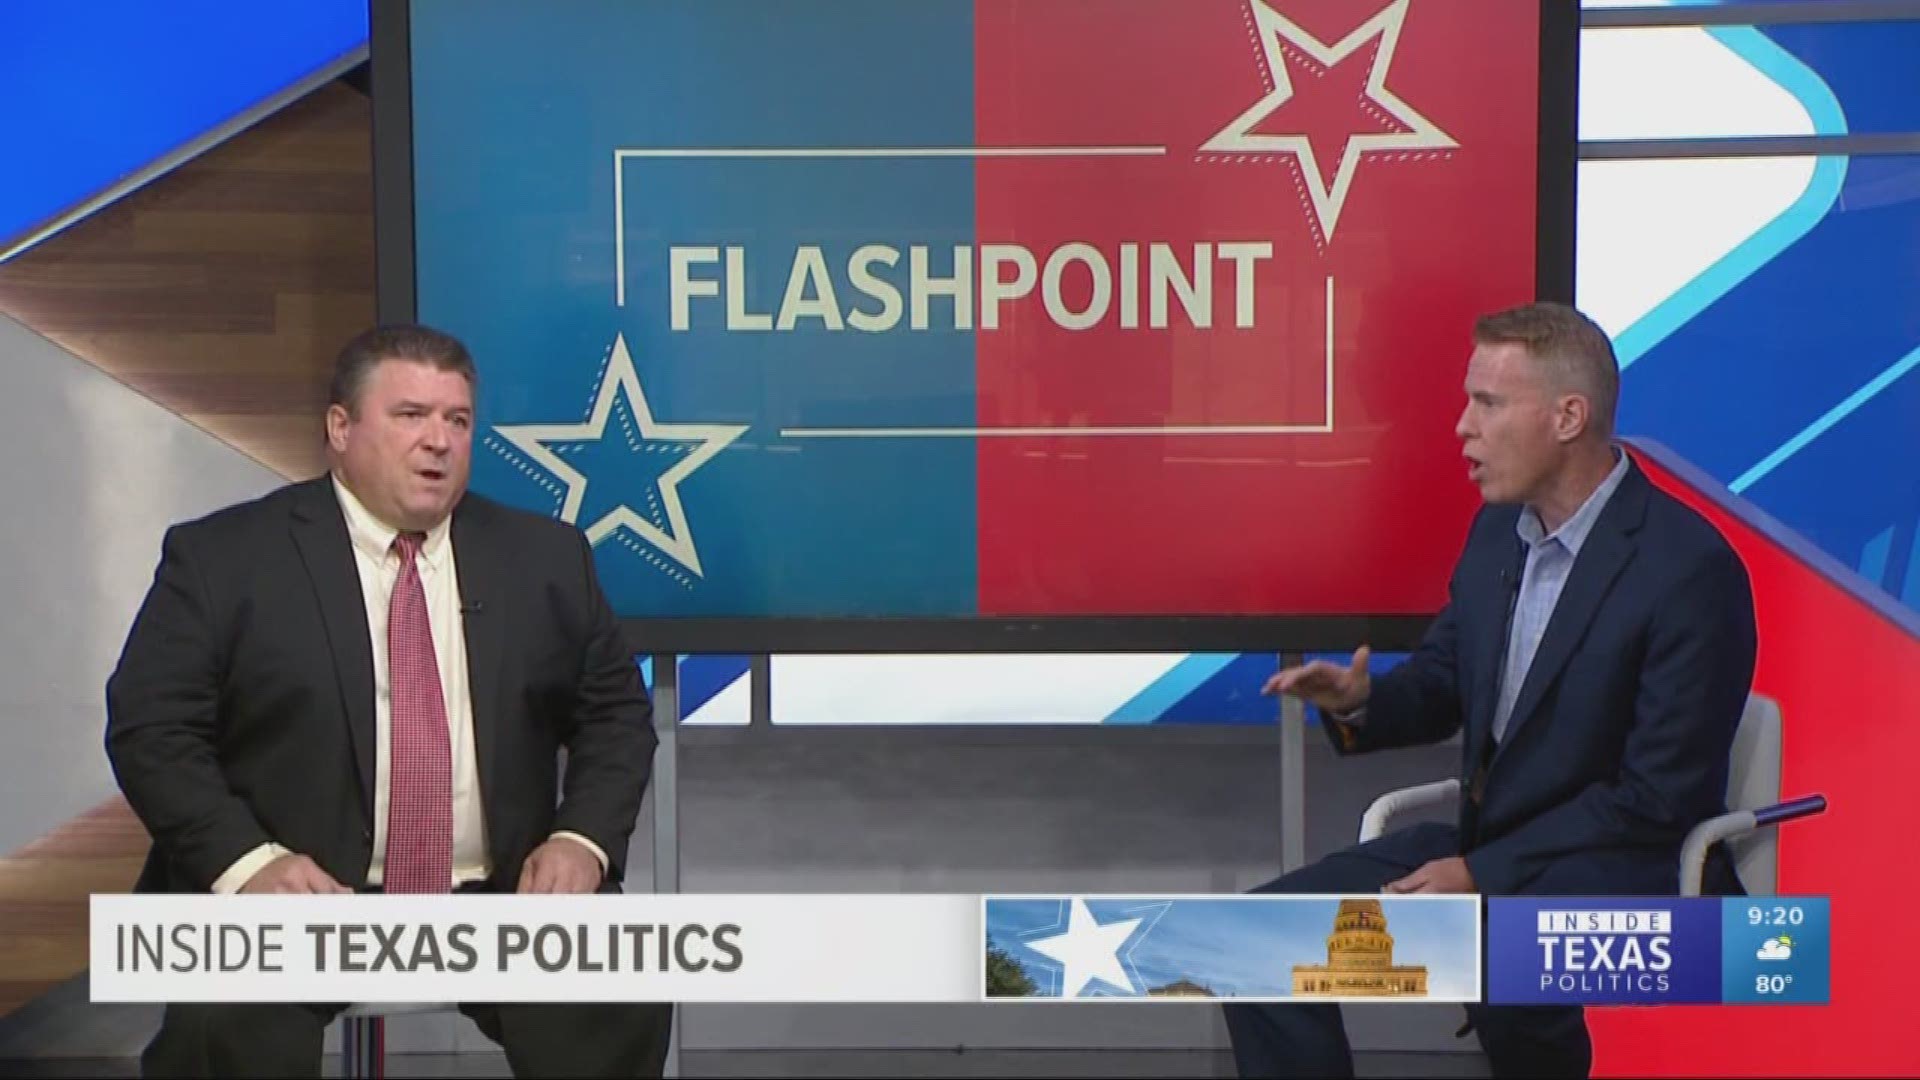 The stock market is shaky. President Trump proposed a payroll tax cut to give people more money to spend. However, he retreated from that tax cut hours after he proposed it? Flashpoint debates the President’s sudden change. From the right, Wade Emmert, former chairman of Dallas County's Republican Party. And from the left, Rich Hancock from VirtualNewsCenter.com.